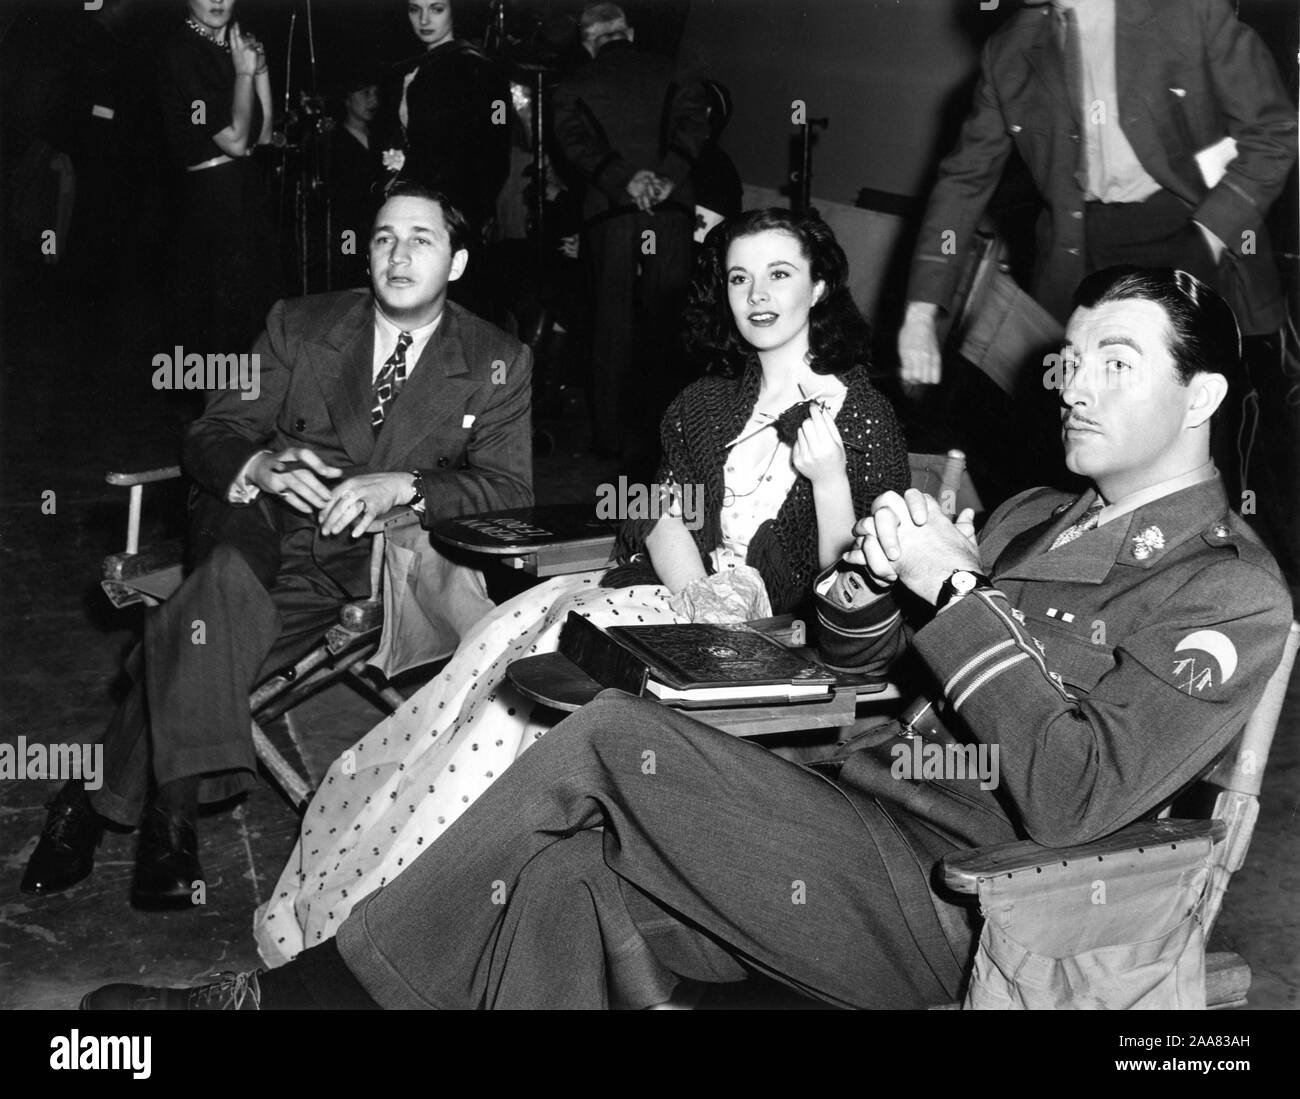 Director MERVYN LeROY VIVIEN LEIGH in costume as Myra and ROBERT TAYLOR in costume as ROTY CRONIN on set candid during filming of WATERLOO BRIDGE 1940 director Mervyn LeRoy play Robert E. Sherwood Metro Goldwyn Mayer Stock Photo